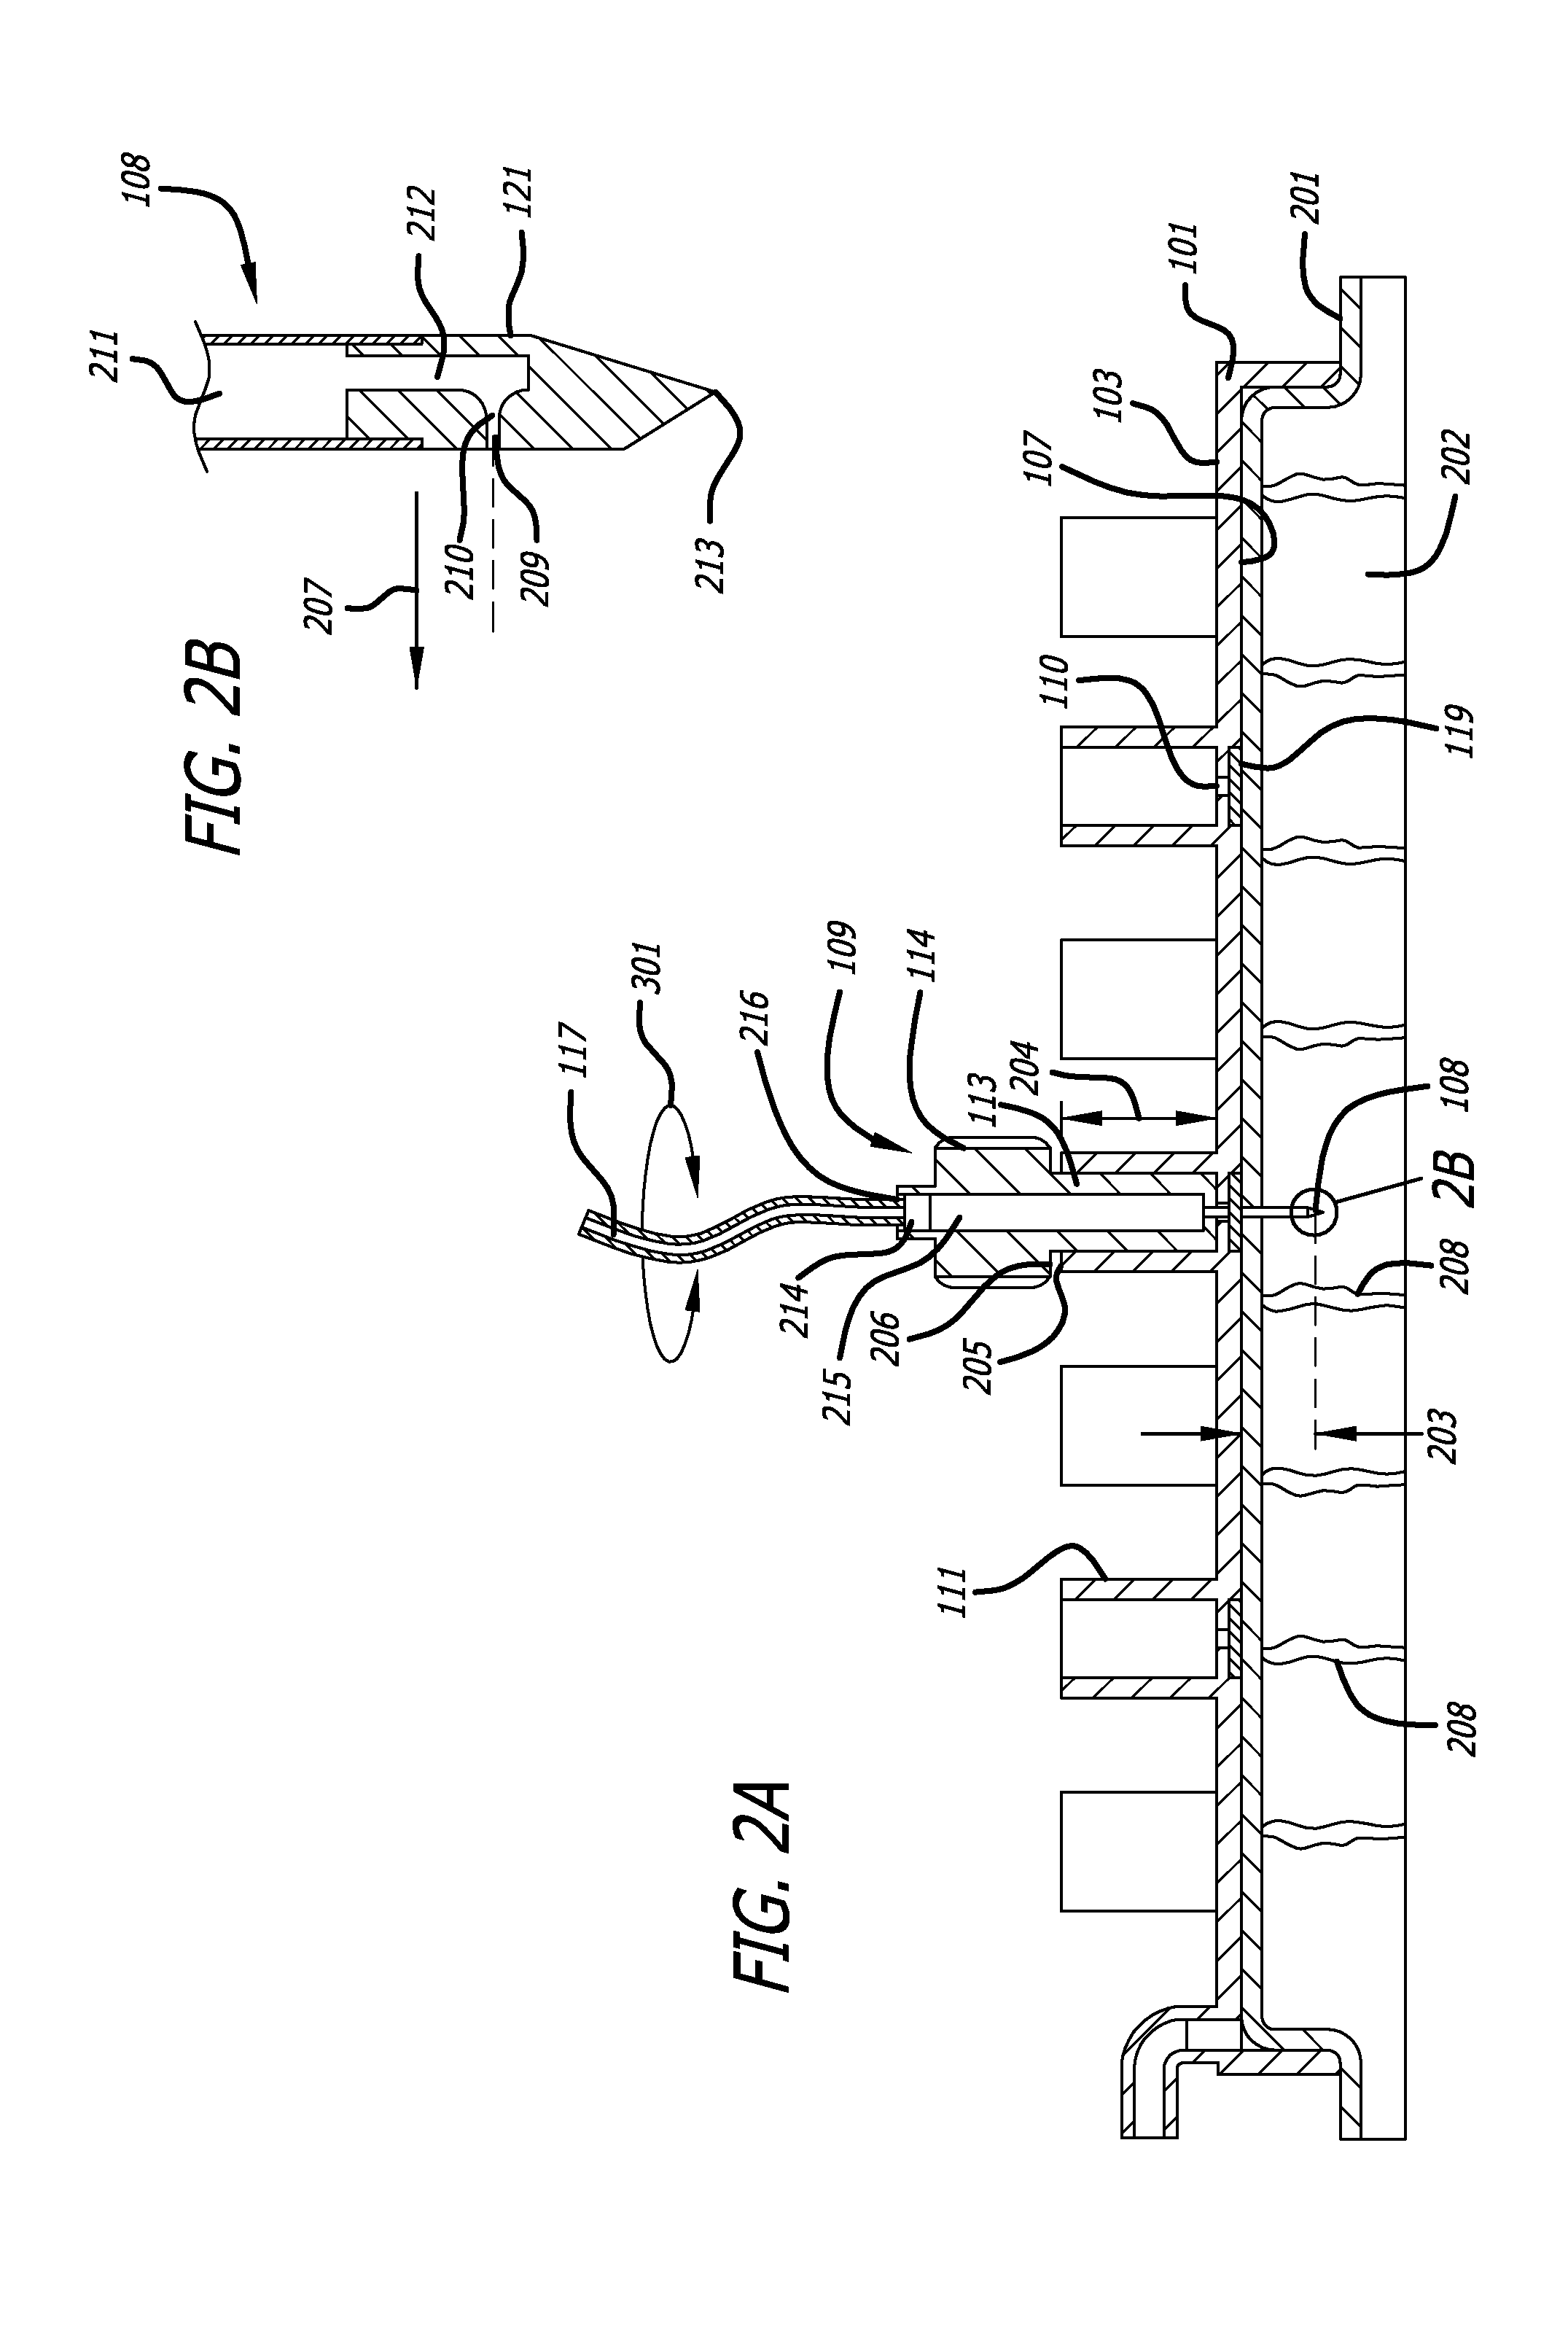 Fluid-jet dissection system and method for reducing the appearance of cellulite